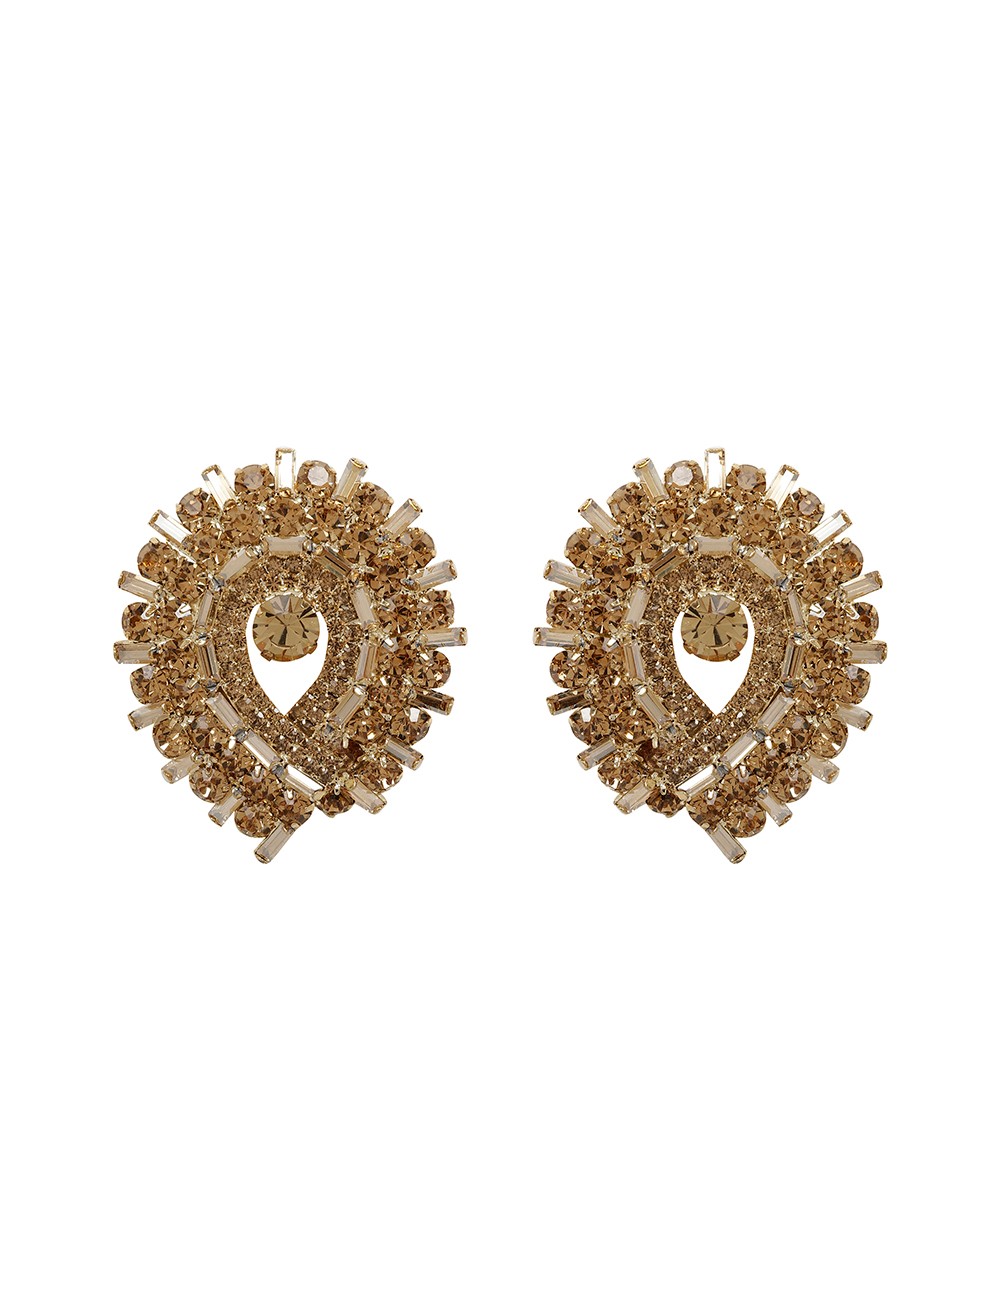 Gold Shell Earrings With Gold Crystals